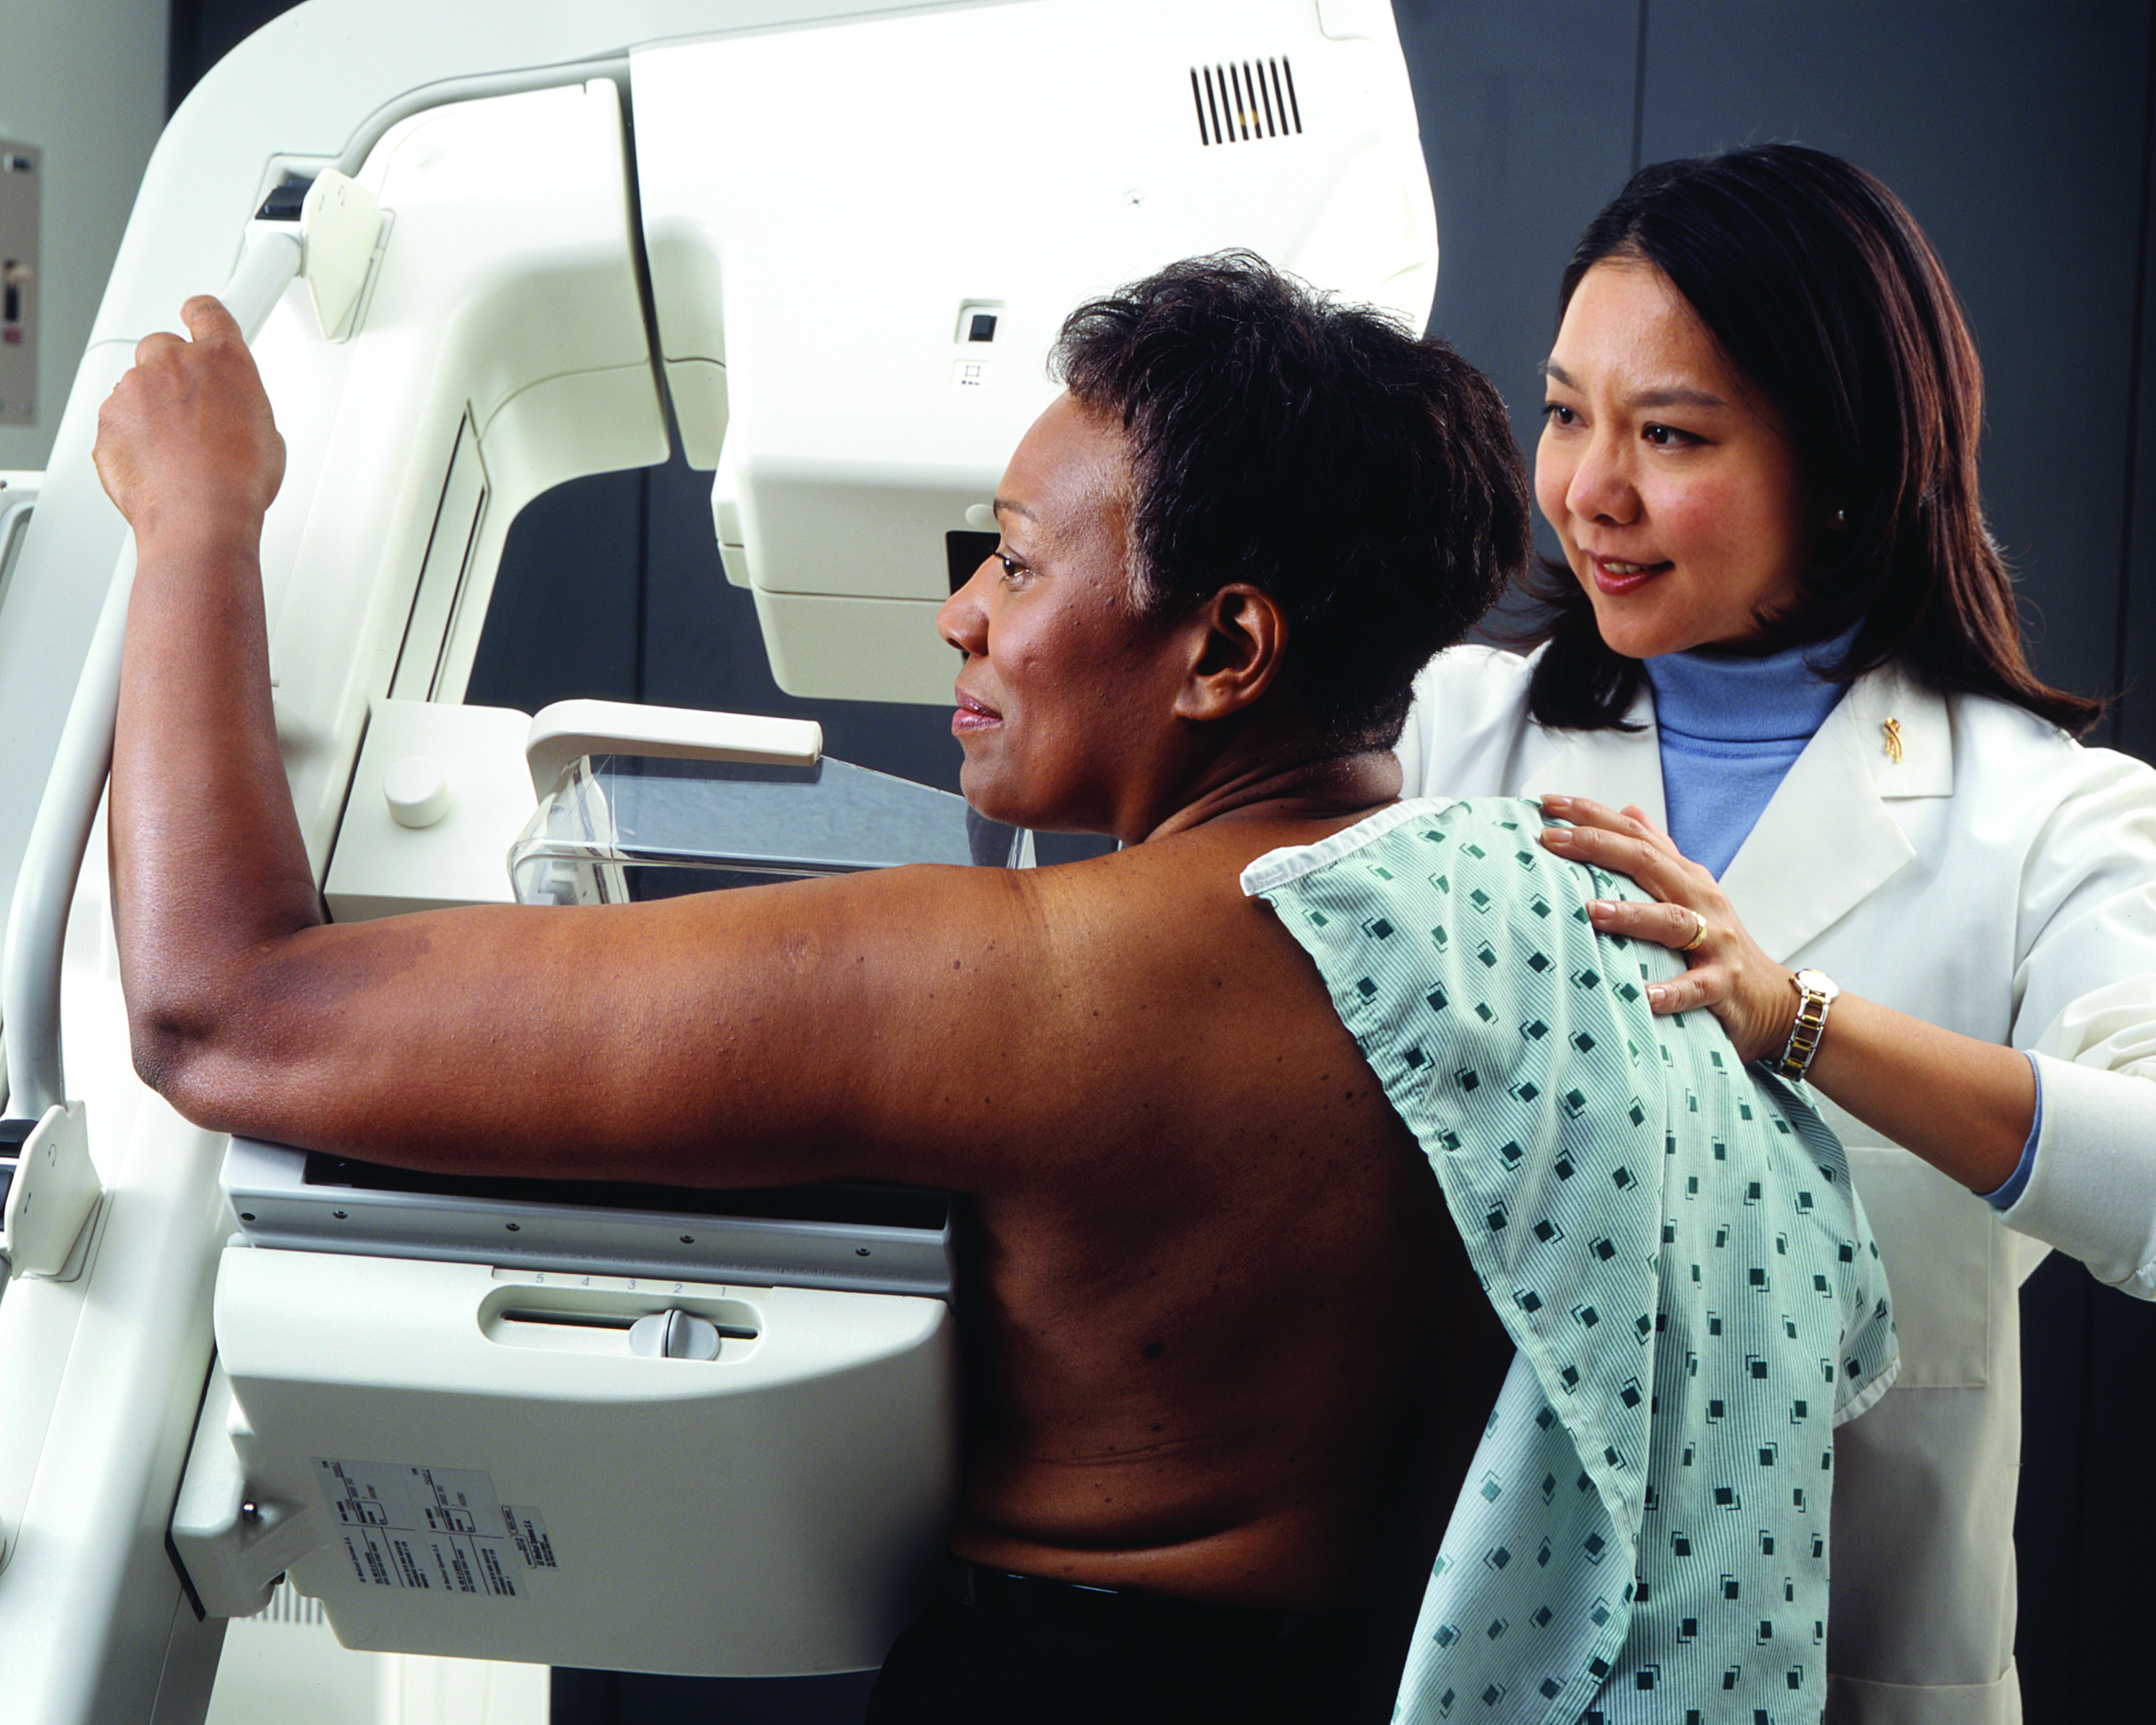 New guidelines for breast cancer screening